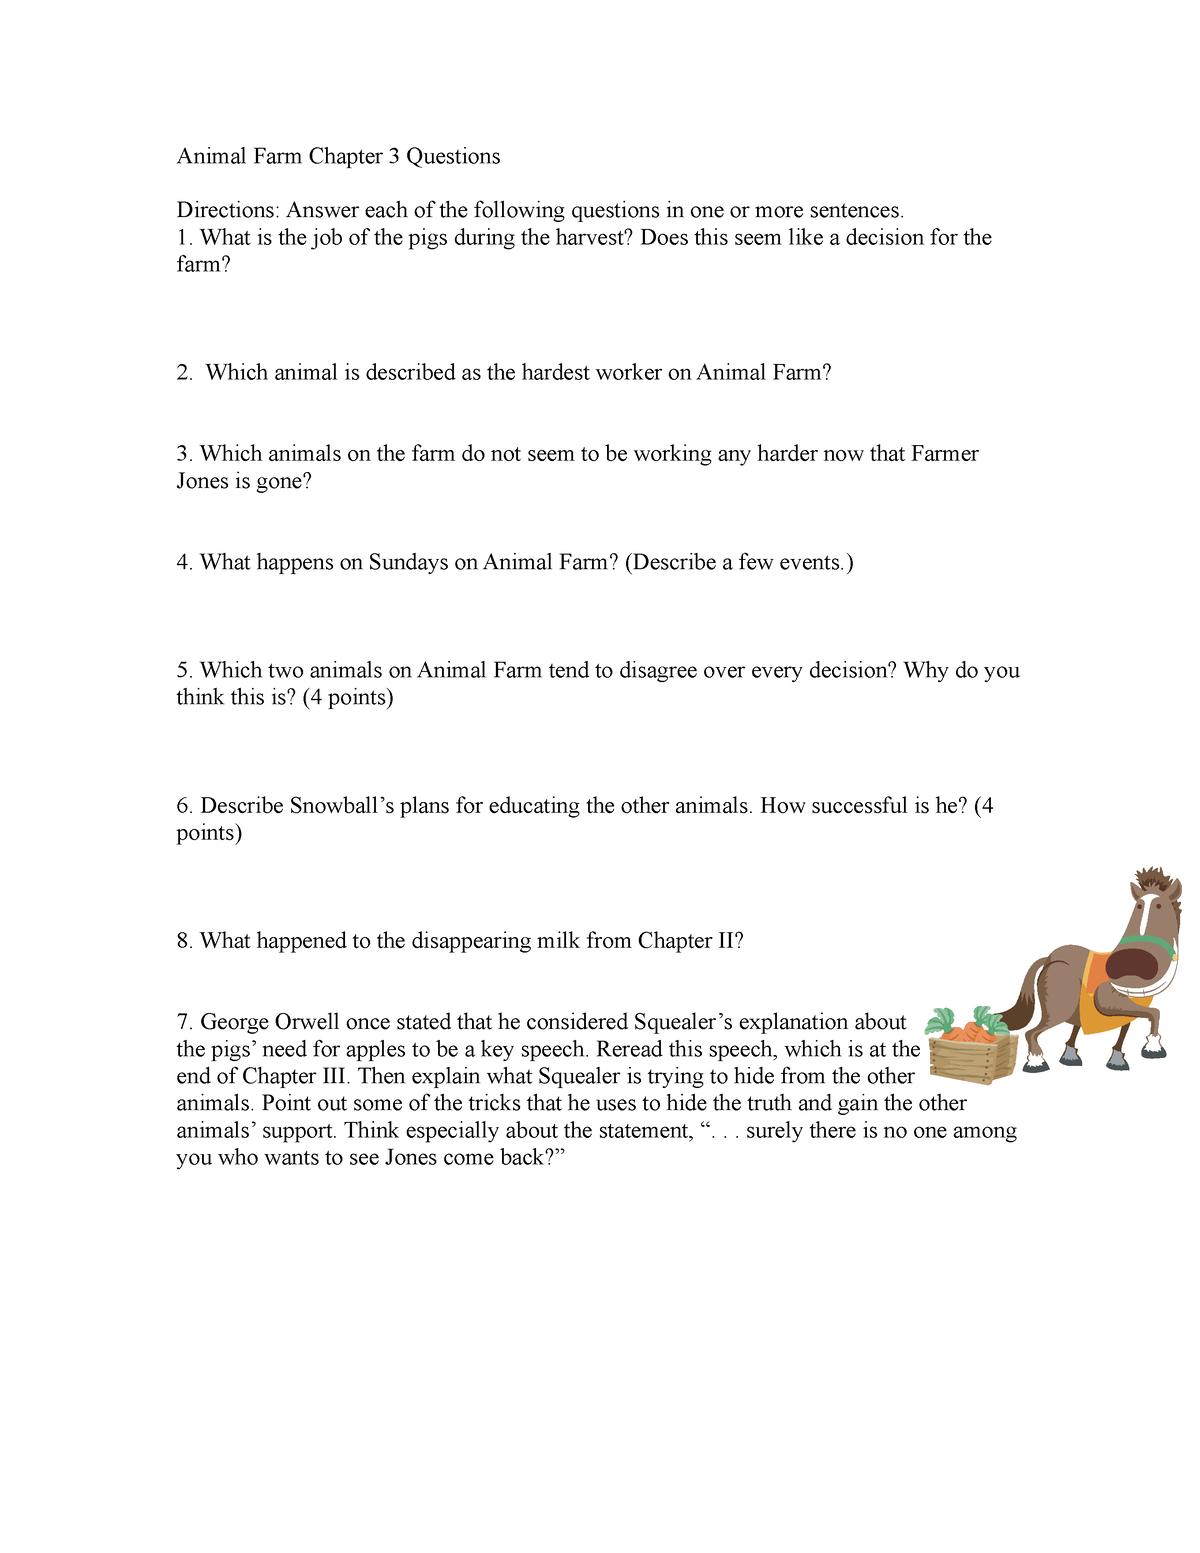 Animal farm chapter 3 questions - Animal Farm Chapter 3 Questions  Directions: Answer each of the - Studocu